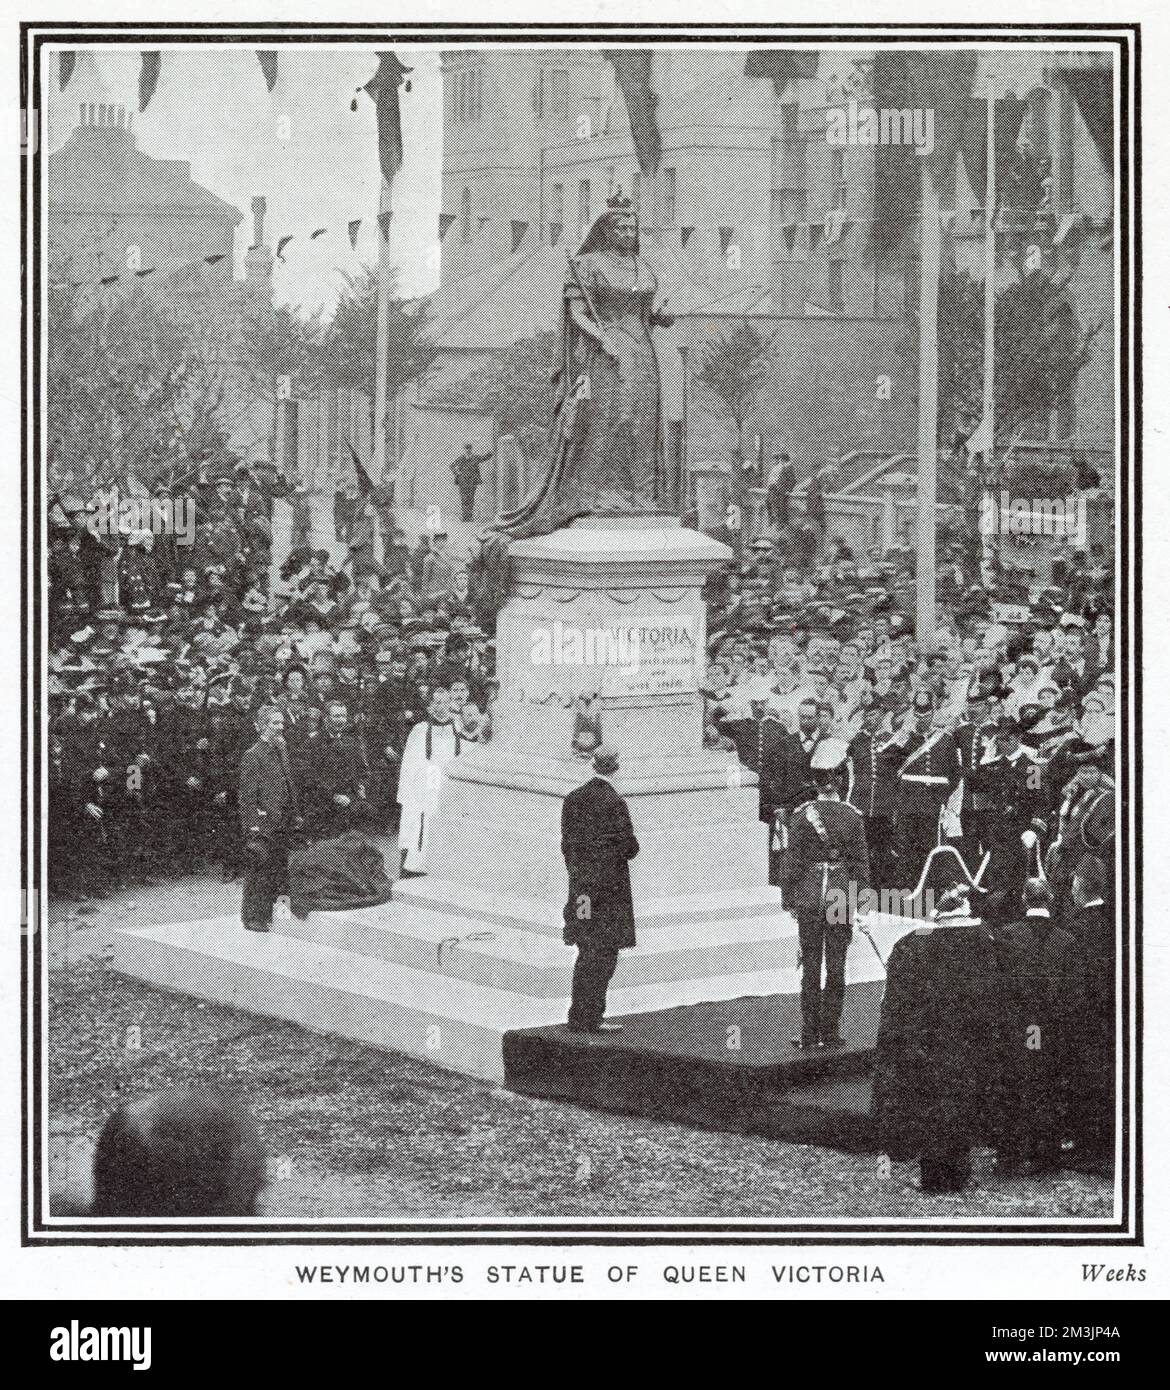 The life-size bronze statue of Queen Victoria on a massive pedestal of Portland stone, to commemorate her reign. Standing at the eastern extremity of Weymouth. Unveiled by Prince Henry of Battenberg, designed by George Blackall Simonds.       Date: 20th October 1902 Stock Photo